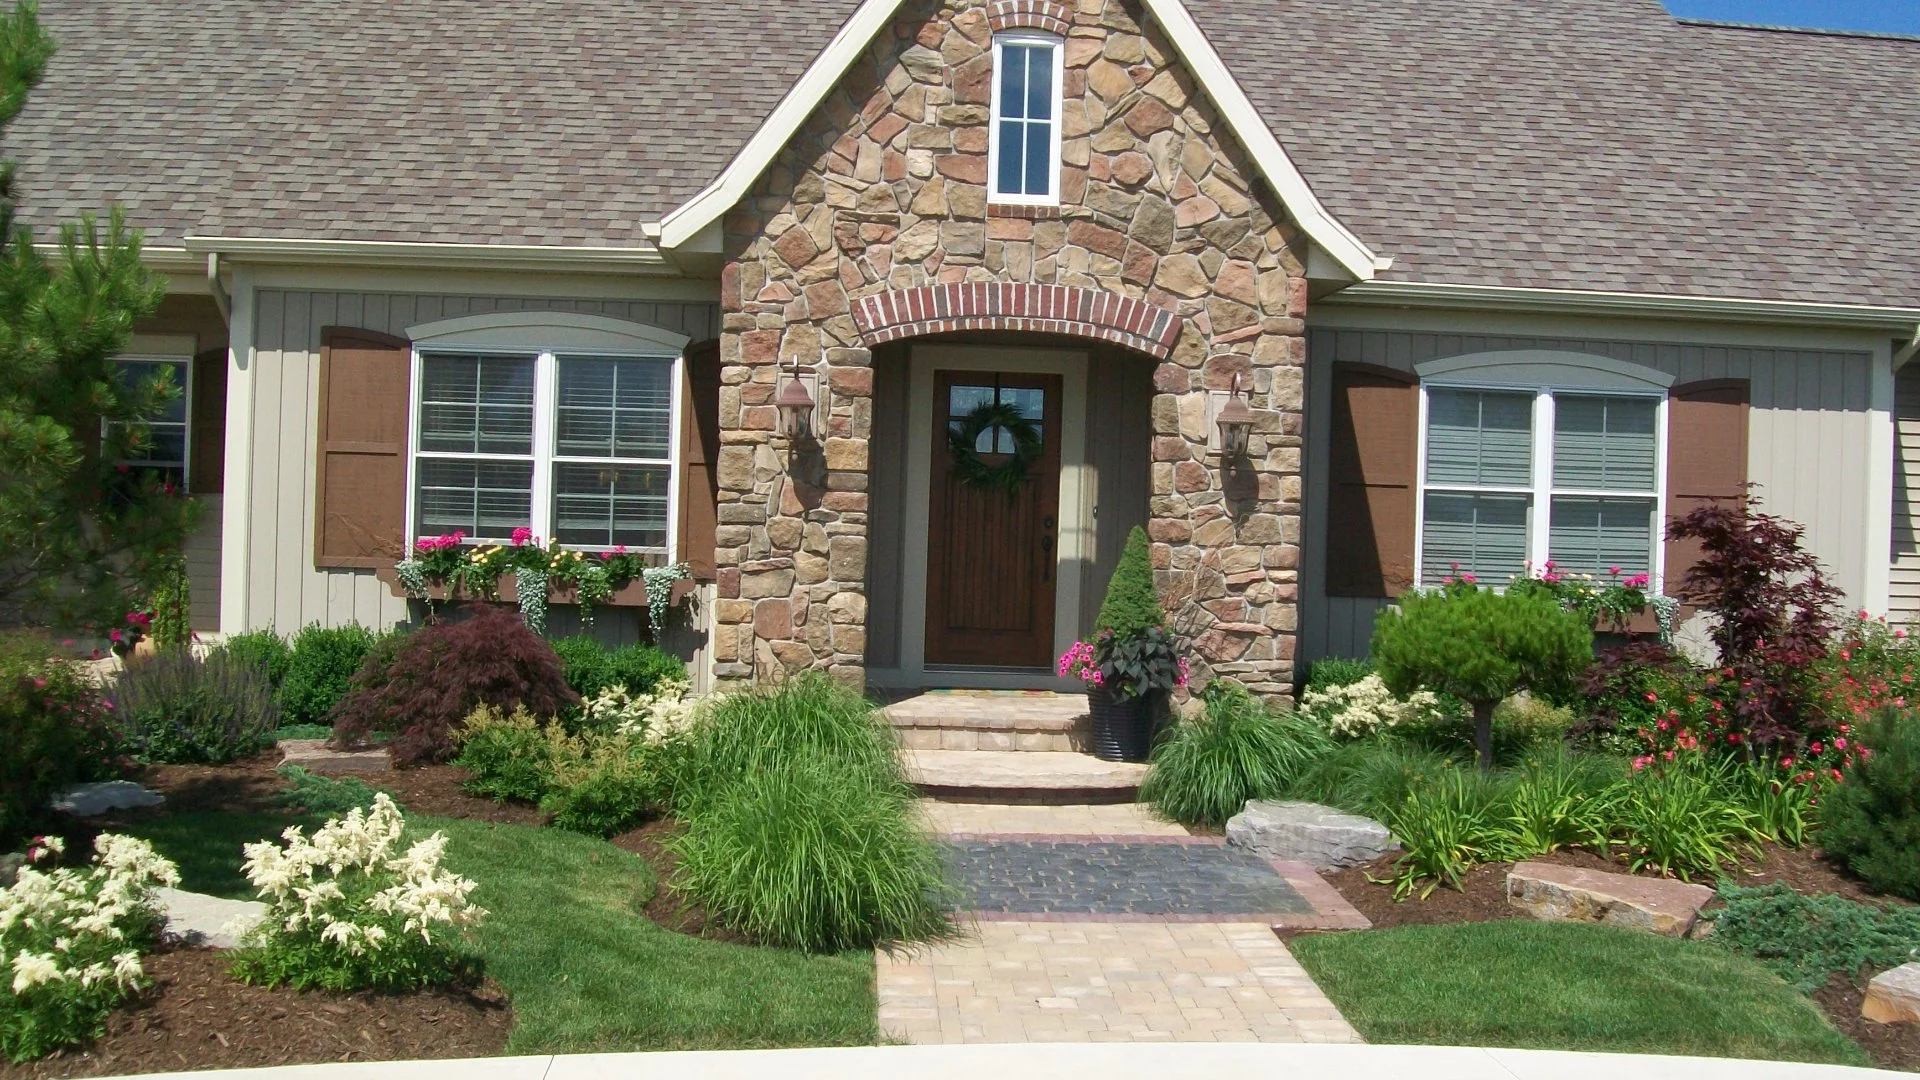 Give Your Home a Facelift With These 3 Landscape Additions!